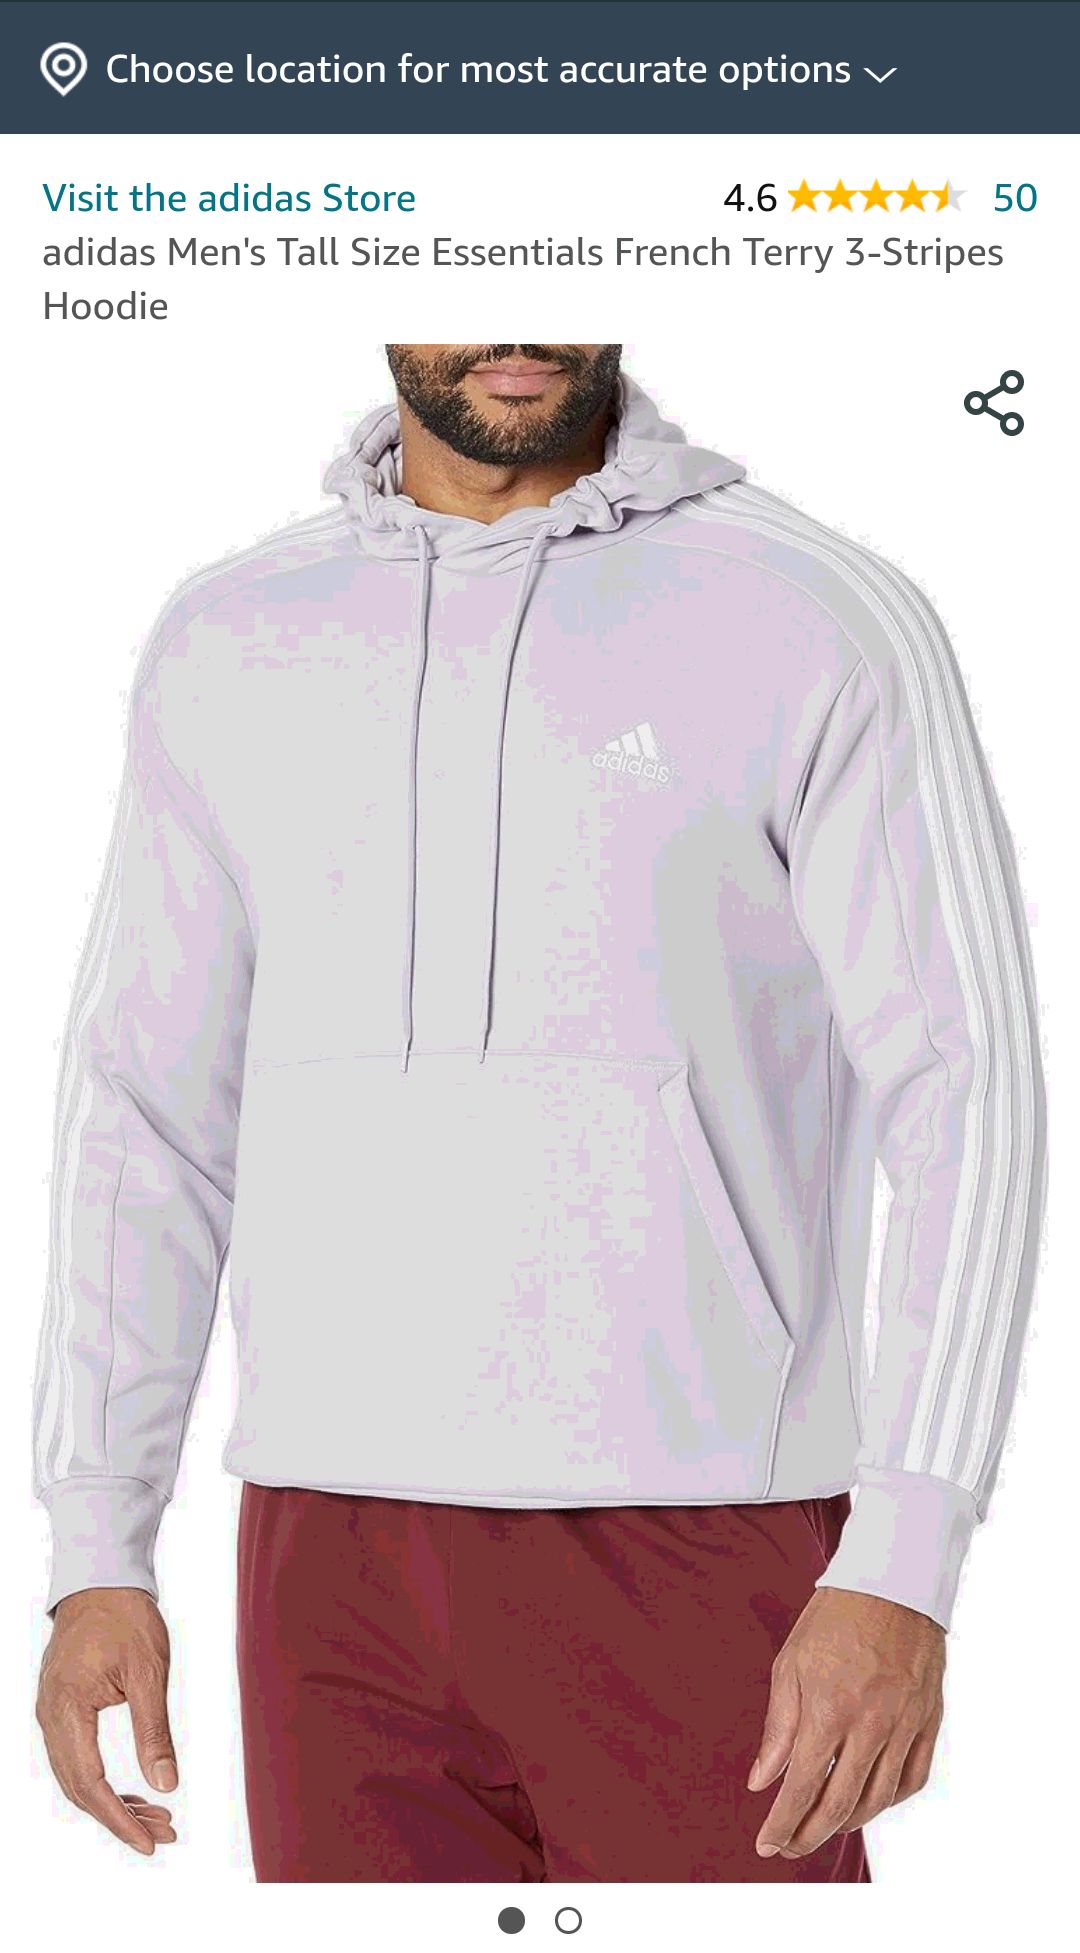 adidas Men's Essentials French Terry 3-Stripes Hoodie, Silver Dawn/White, Large at Amazon Men’s Clothing store